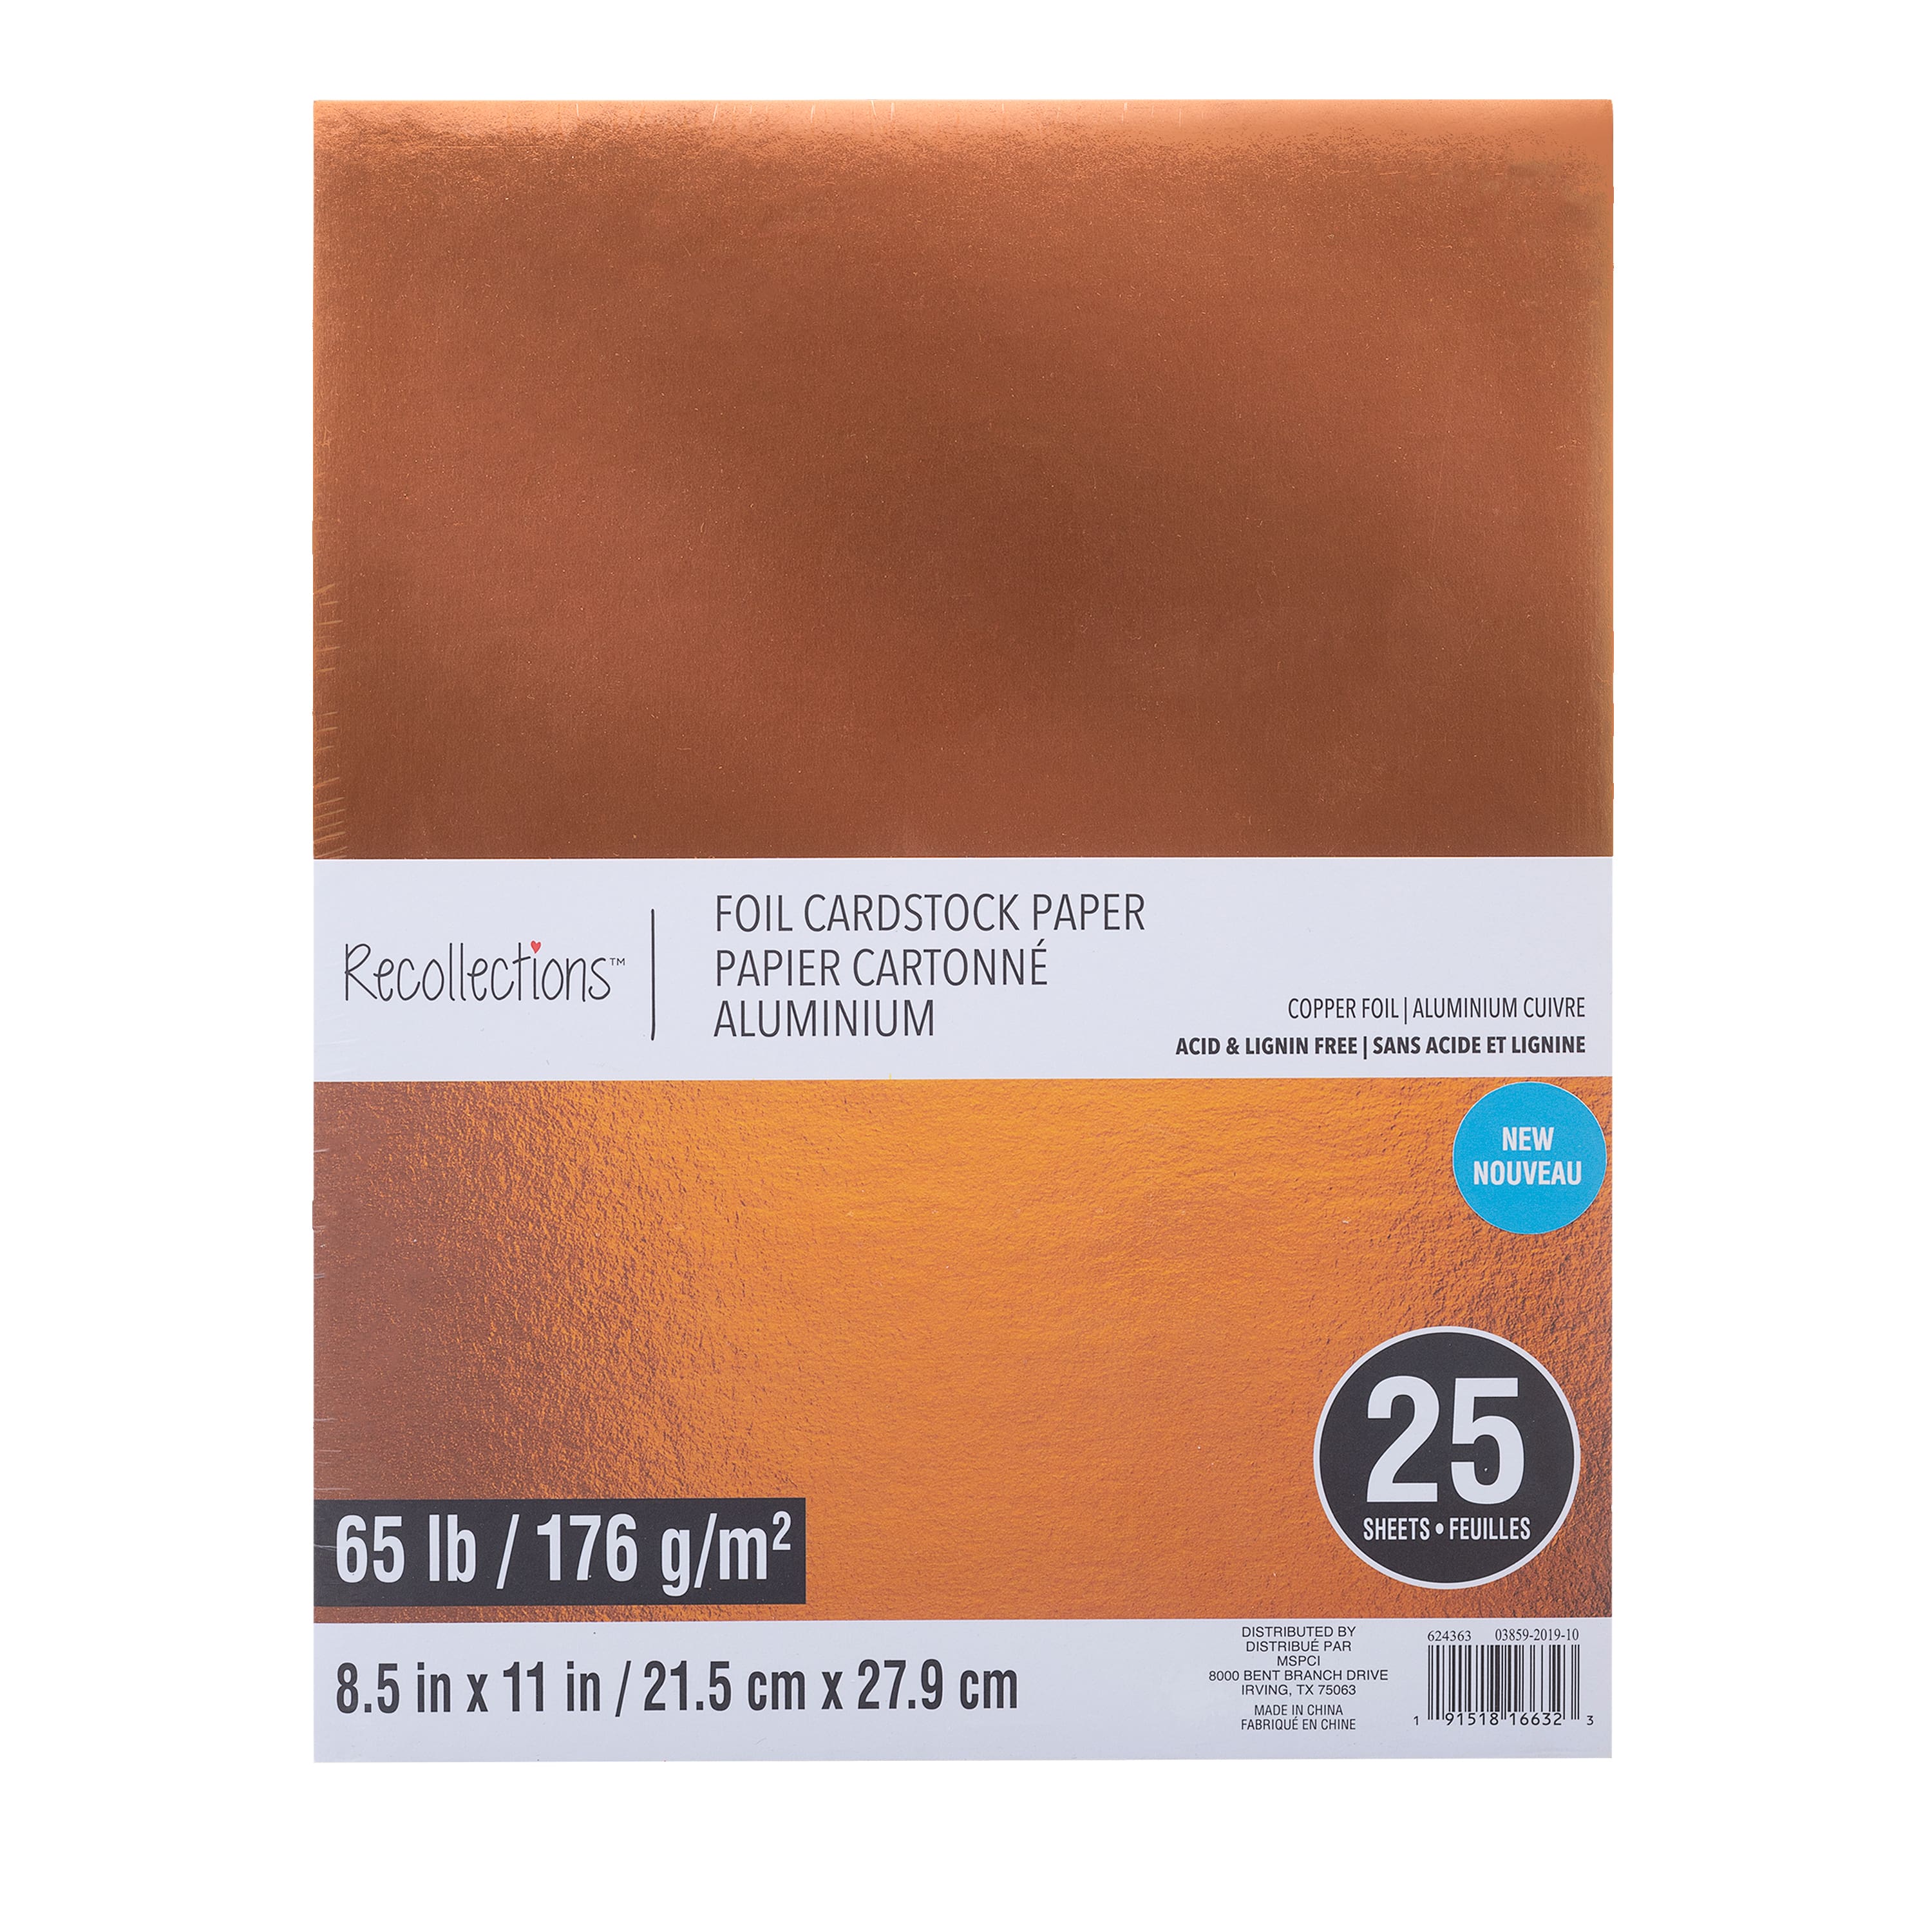 Copper Foil 8.5 x 11 Cardstock Paper by Recollections™, 25 Sheets